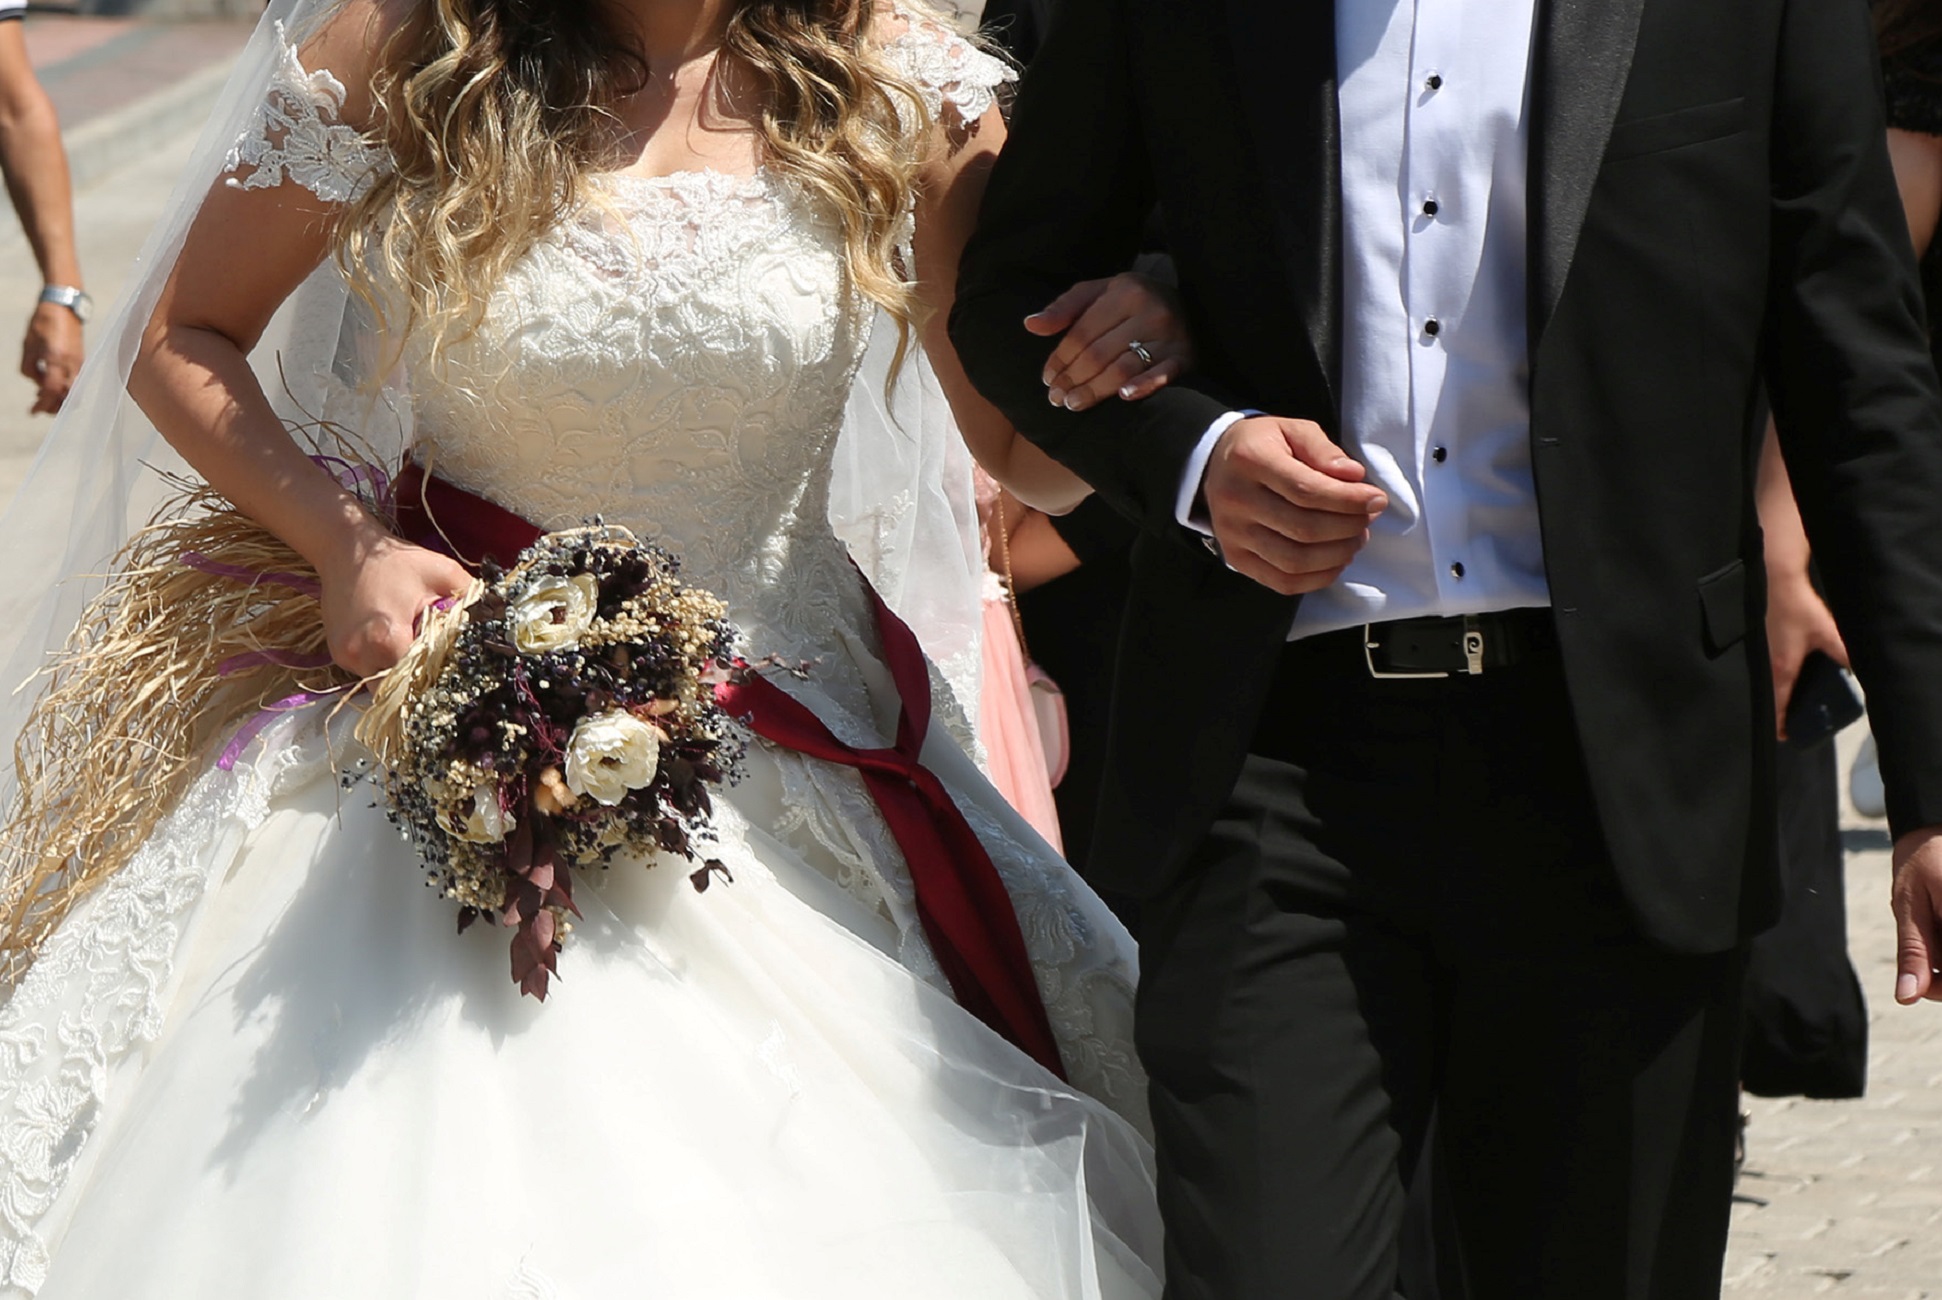 Bride Pelsin Akkoyun and groom Nizamettin Bingol, wearing protective face masks, walk following their civil wedding ceremony, amid the spread of the coronavirus disease (COVID-19), in Diyarbakir, Turkey, July 2, 2020. Turkey reopened its wedding halls in one of the final steps of reopening from the shutdown due to the coronavirus disease (COVID-19). REUTERS/Sertac Kayar